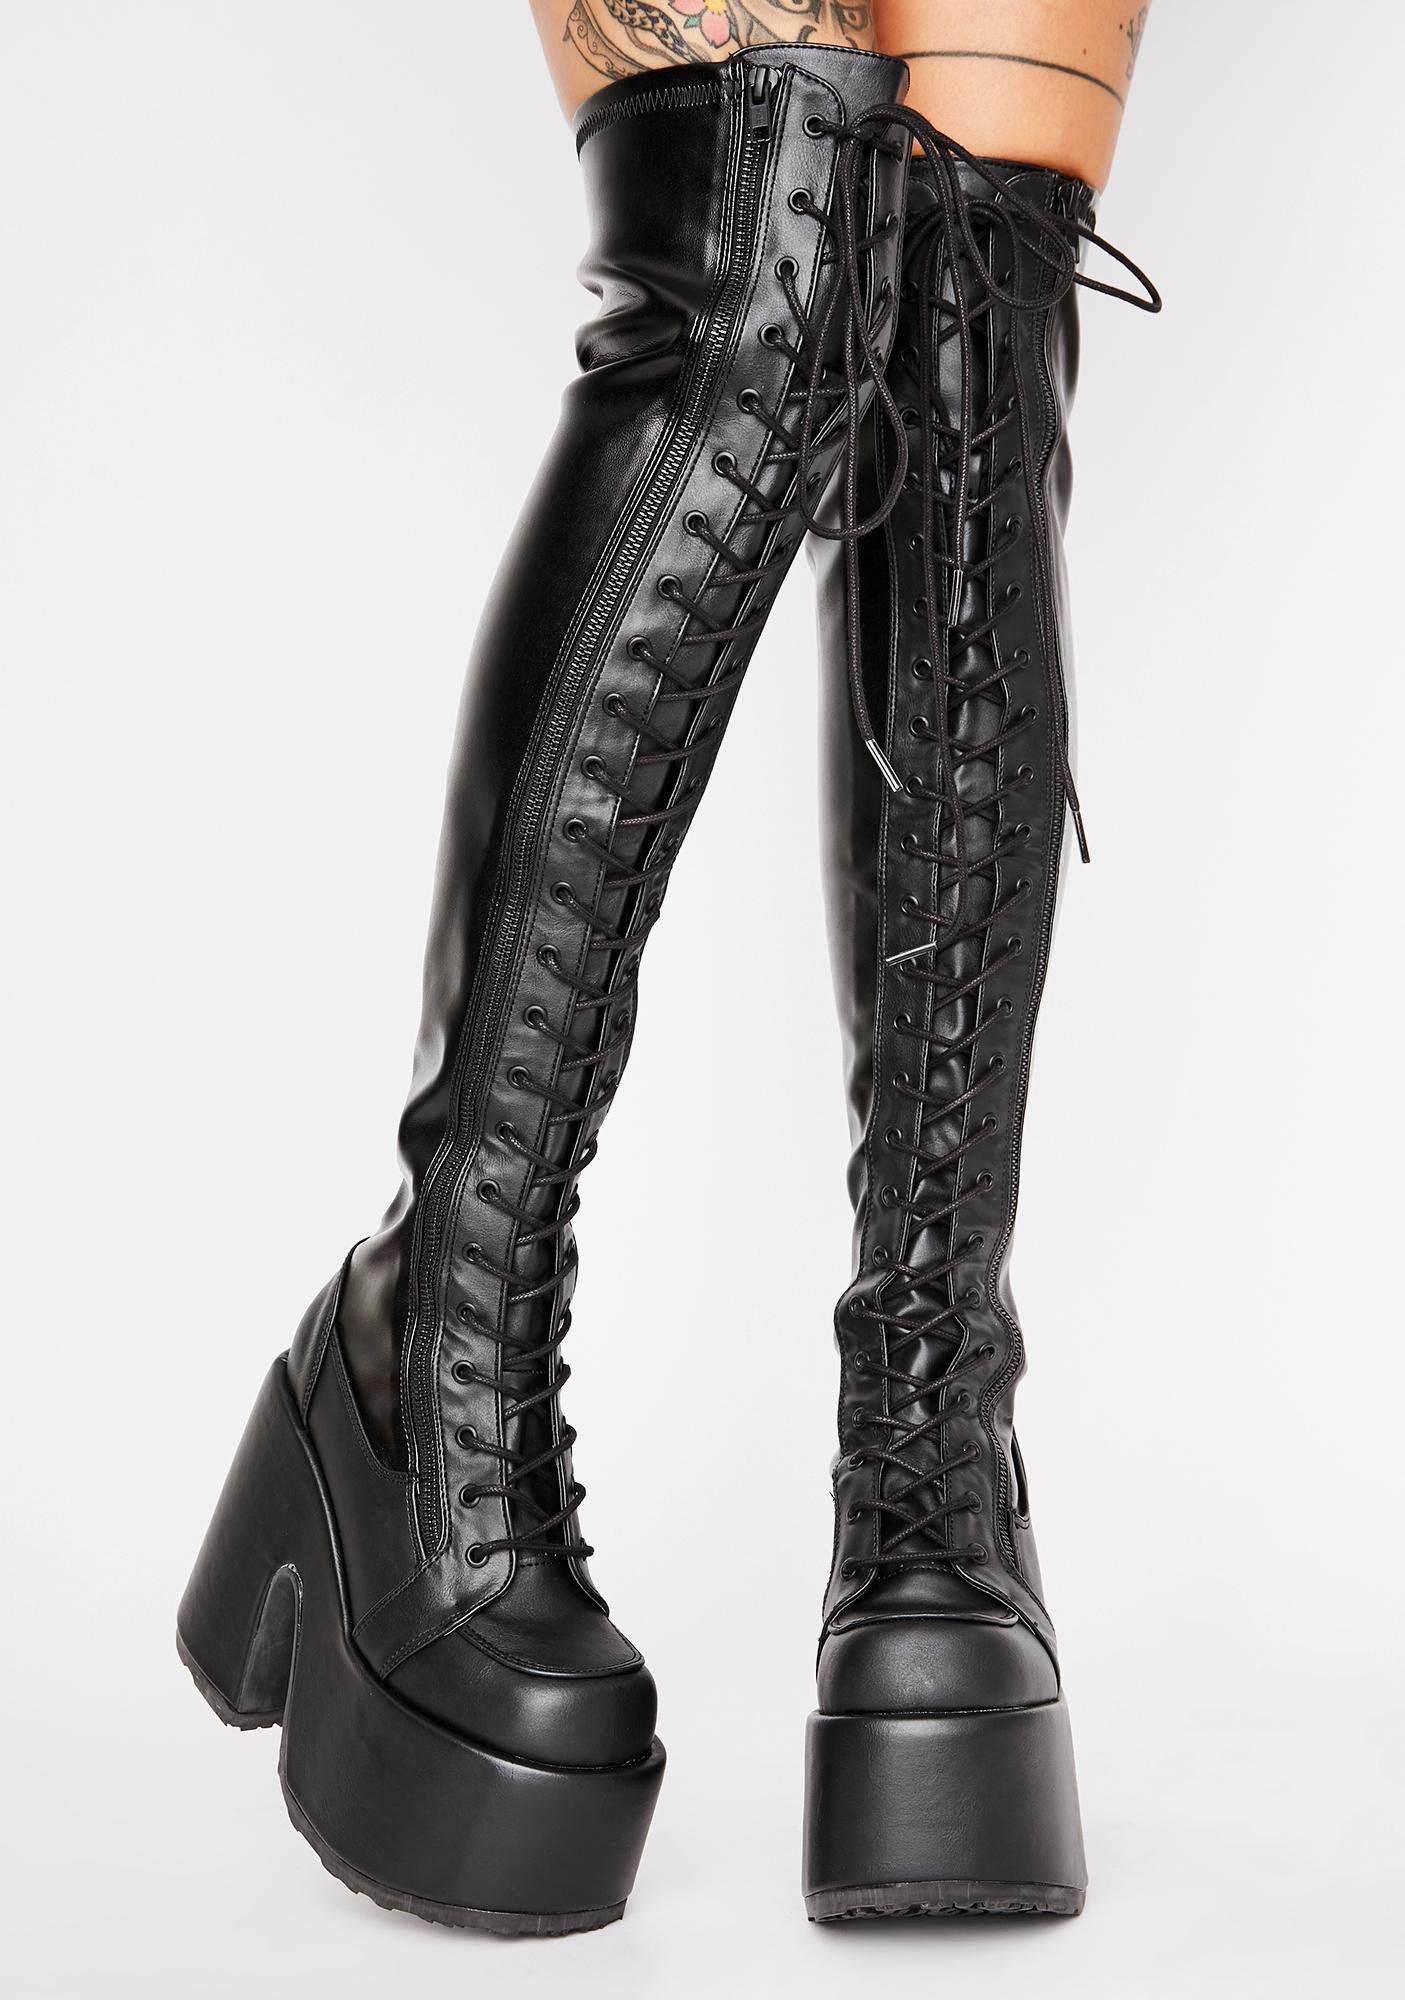 Rave Royalty Thigh High Boots